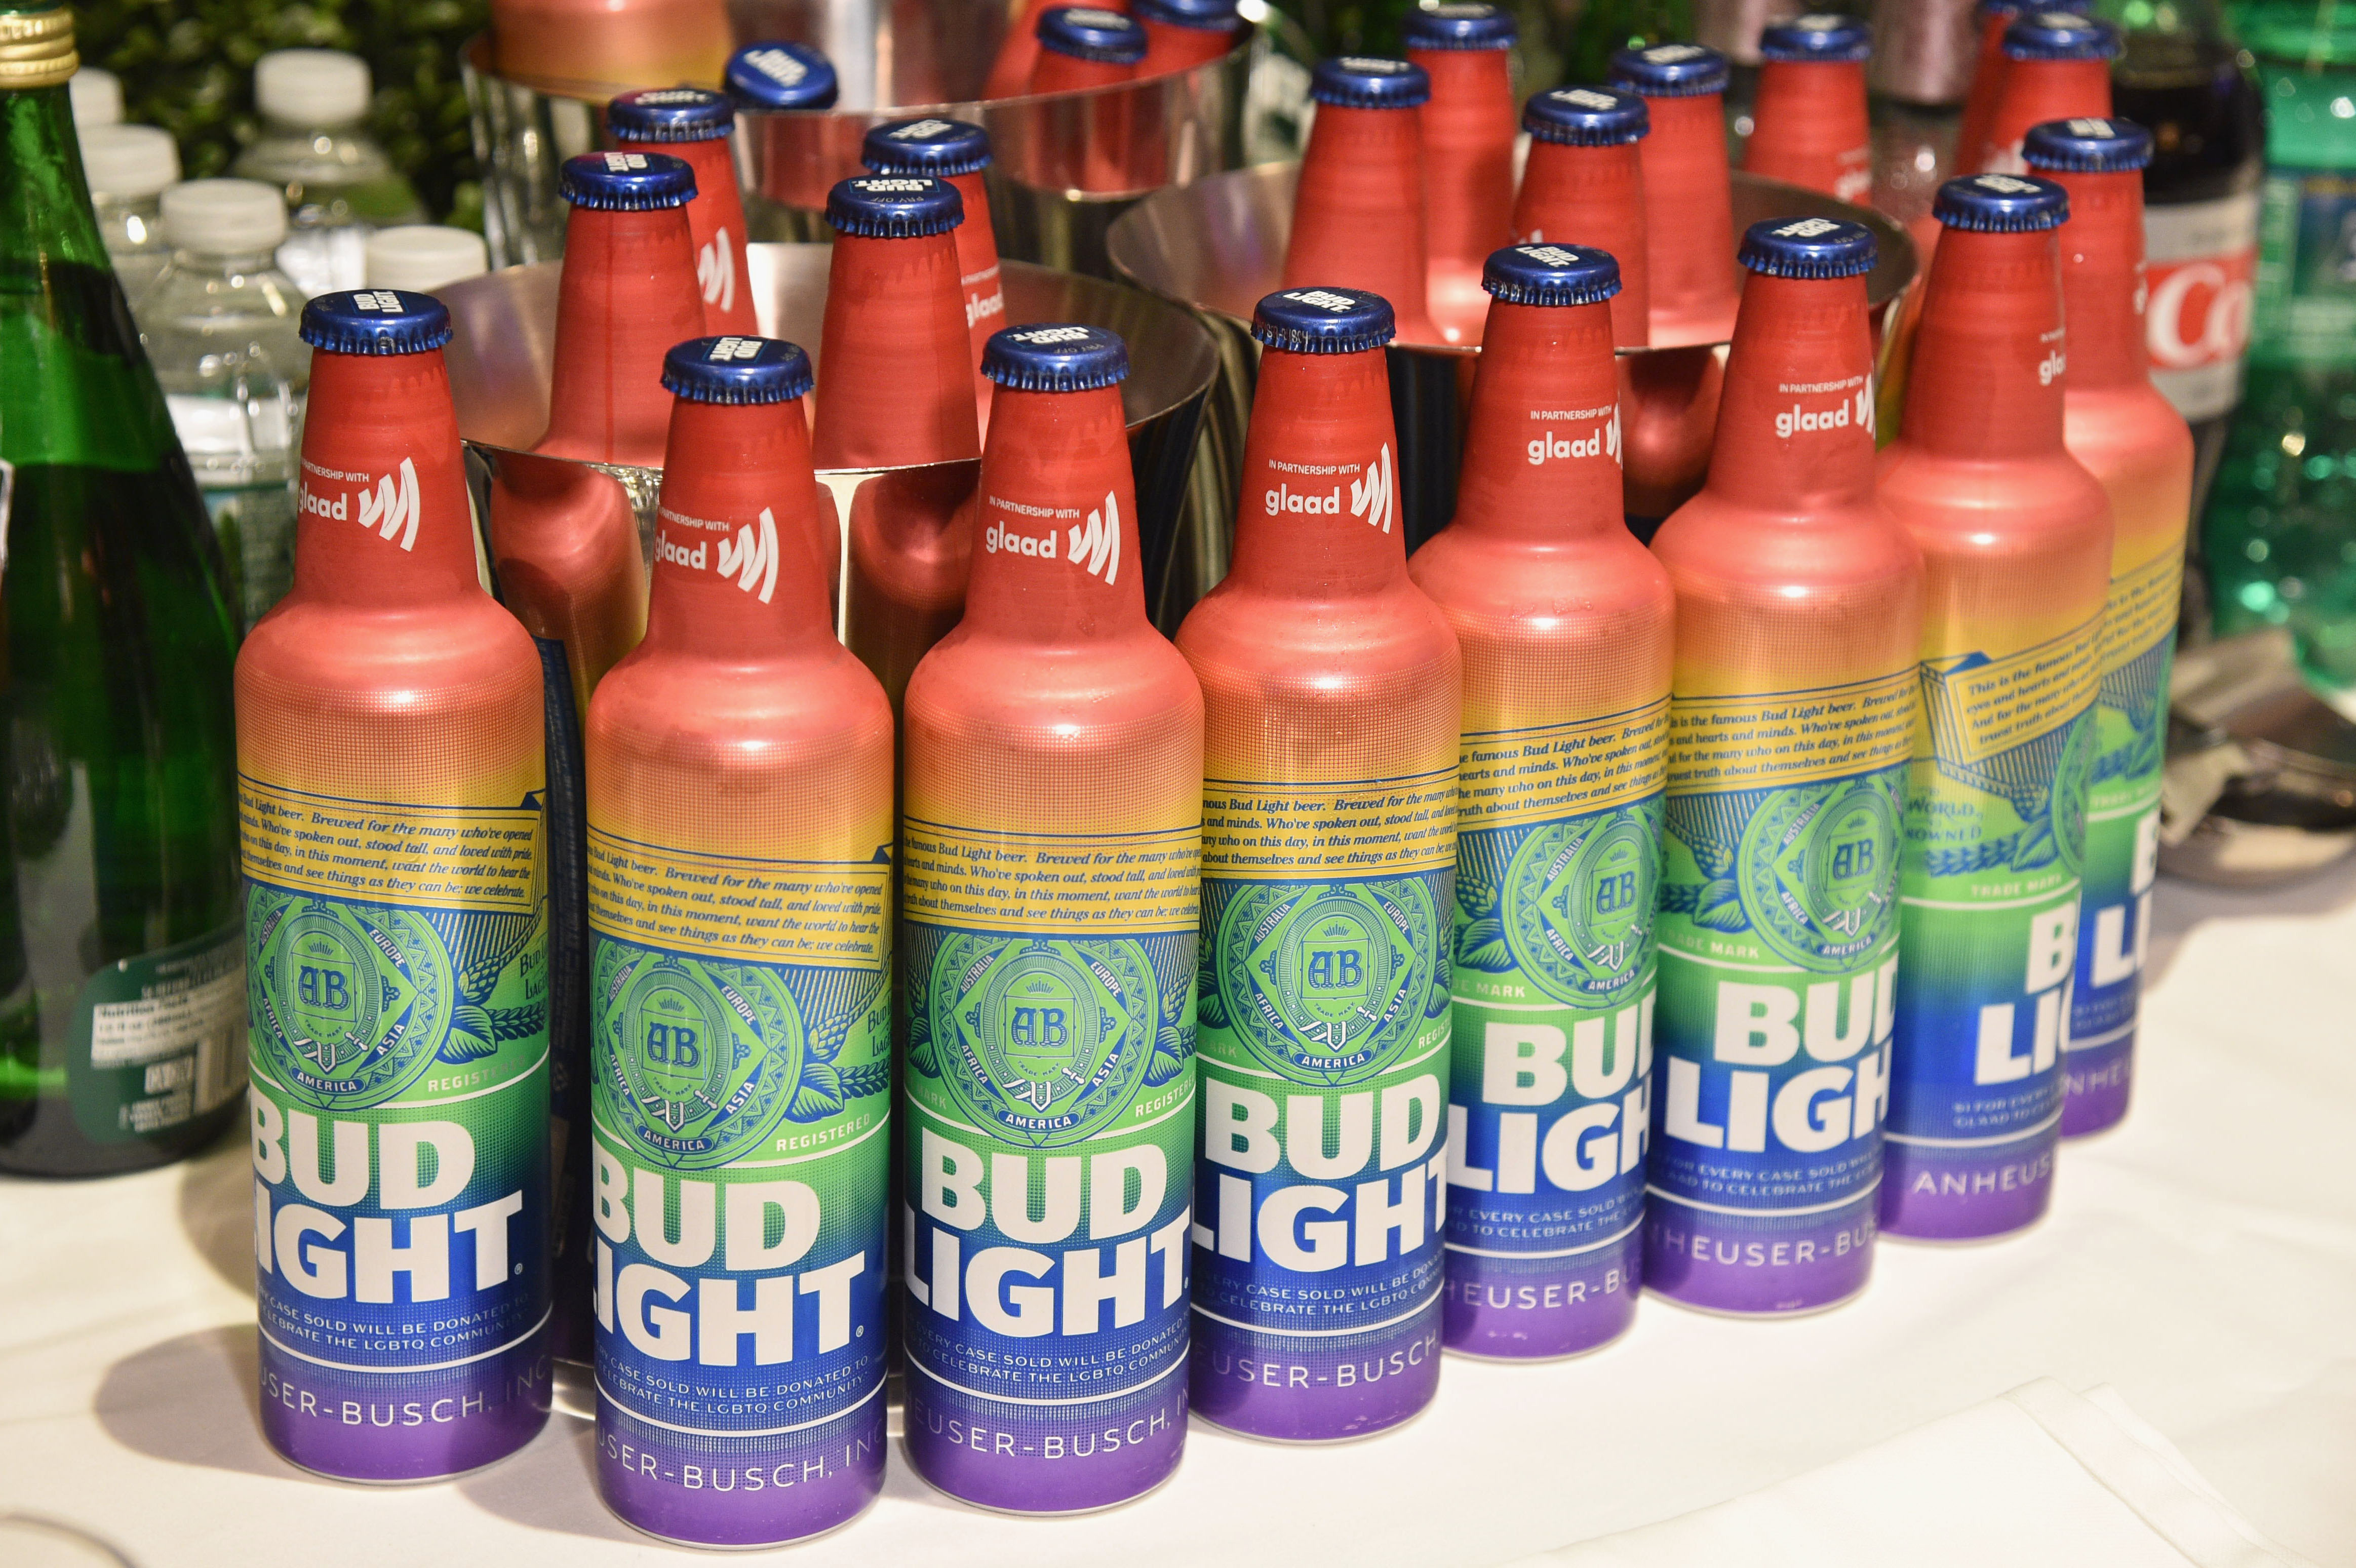 NEW YORK, NEW YORK - MAY 04: A view of rainbow bottles of Bud Light during the 30th Annual GLAAD Media Awards New York at New York Hilton Midtown on May 04, 2019 in New York City. (Photo by Bryan Bedder/Getty Images for GLAAD) (Getty Images for GLAAD&mdash;2019 Getty Images)